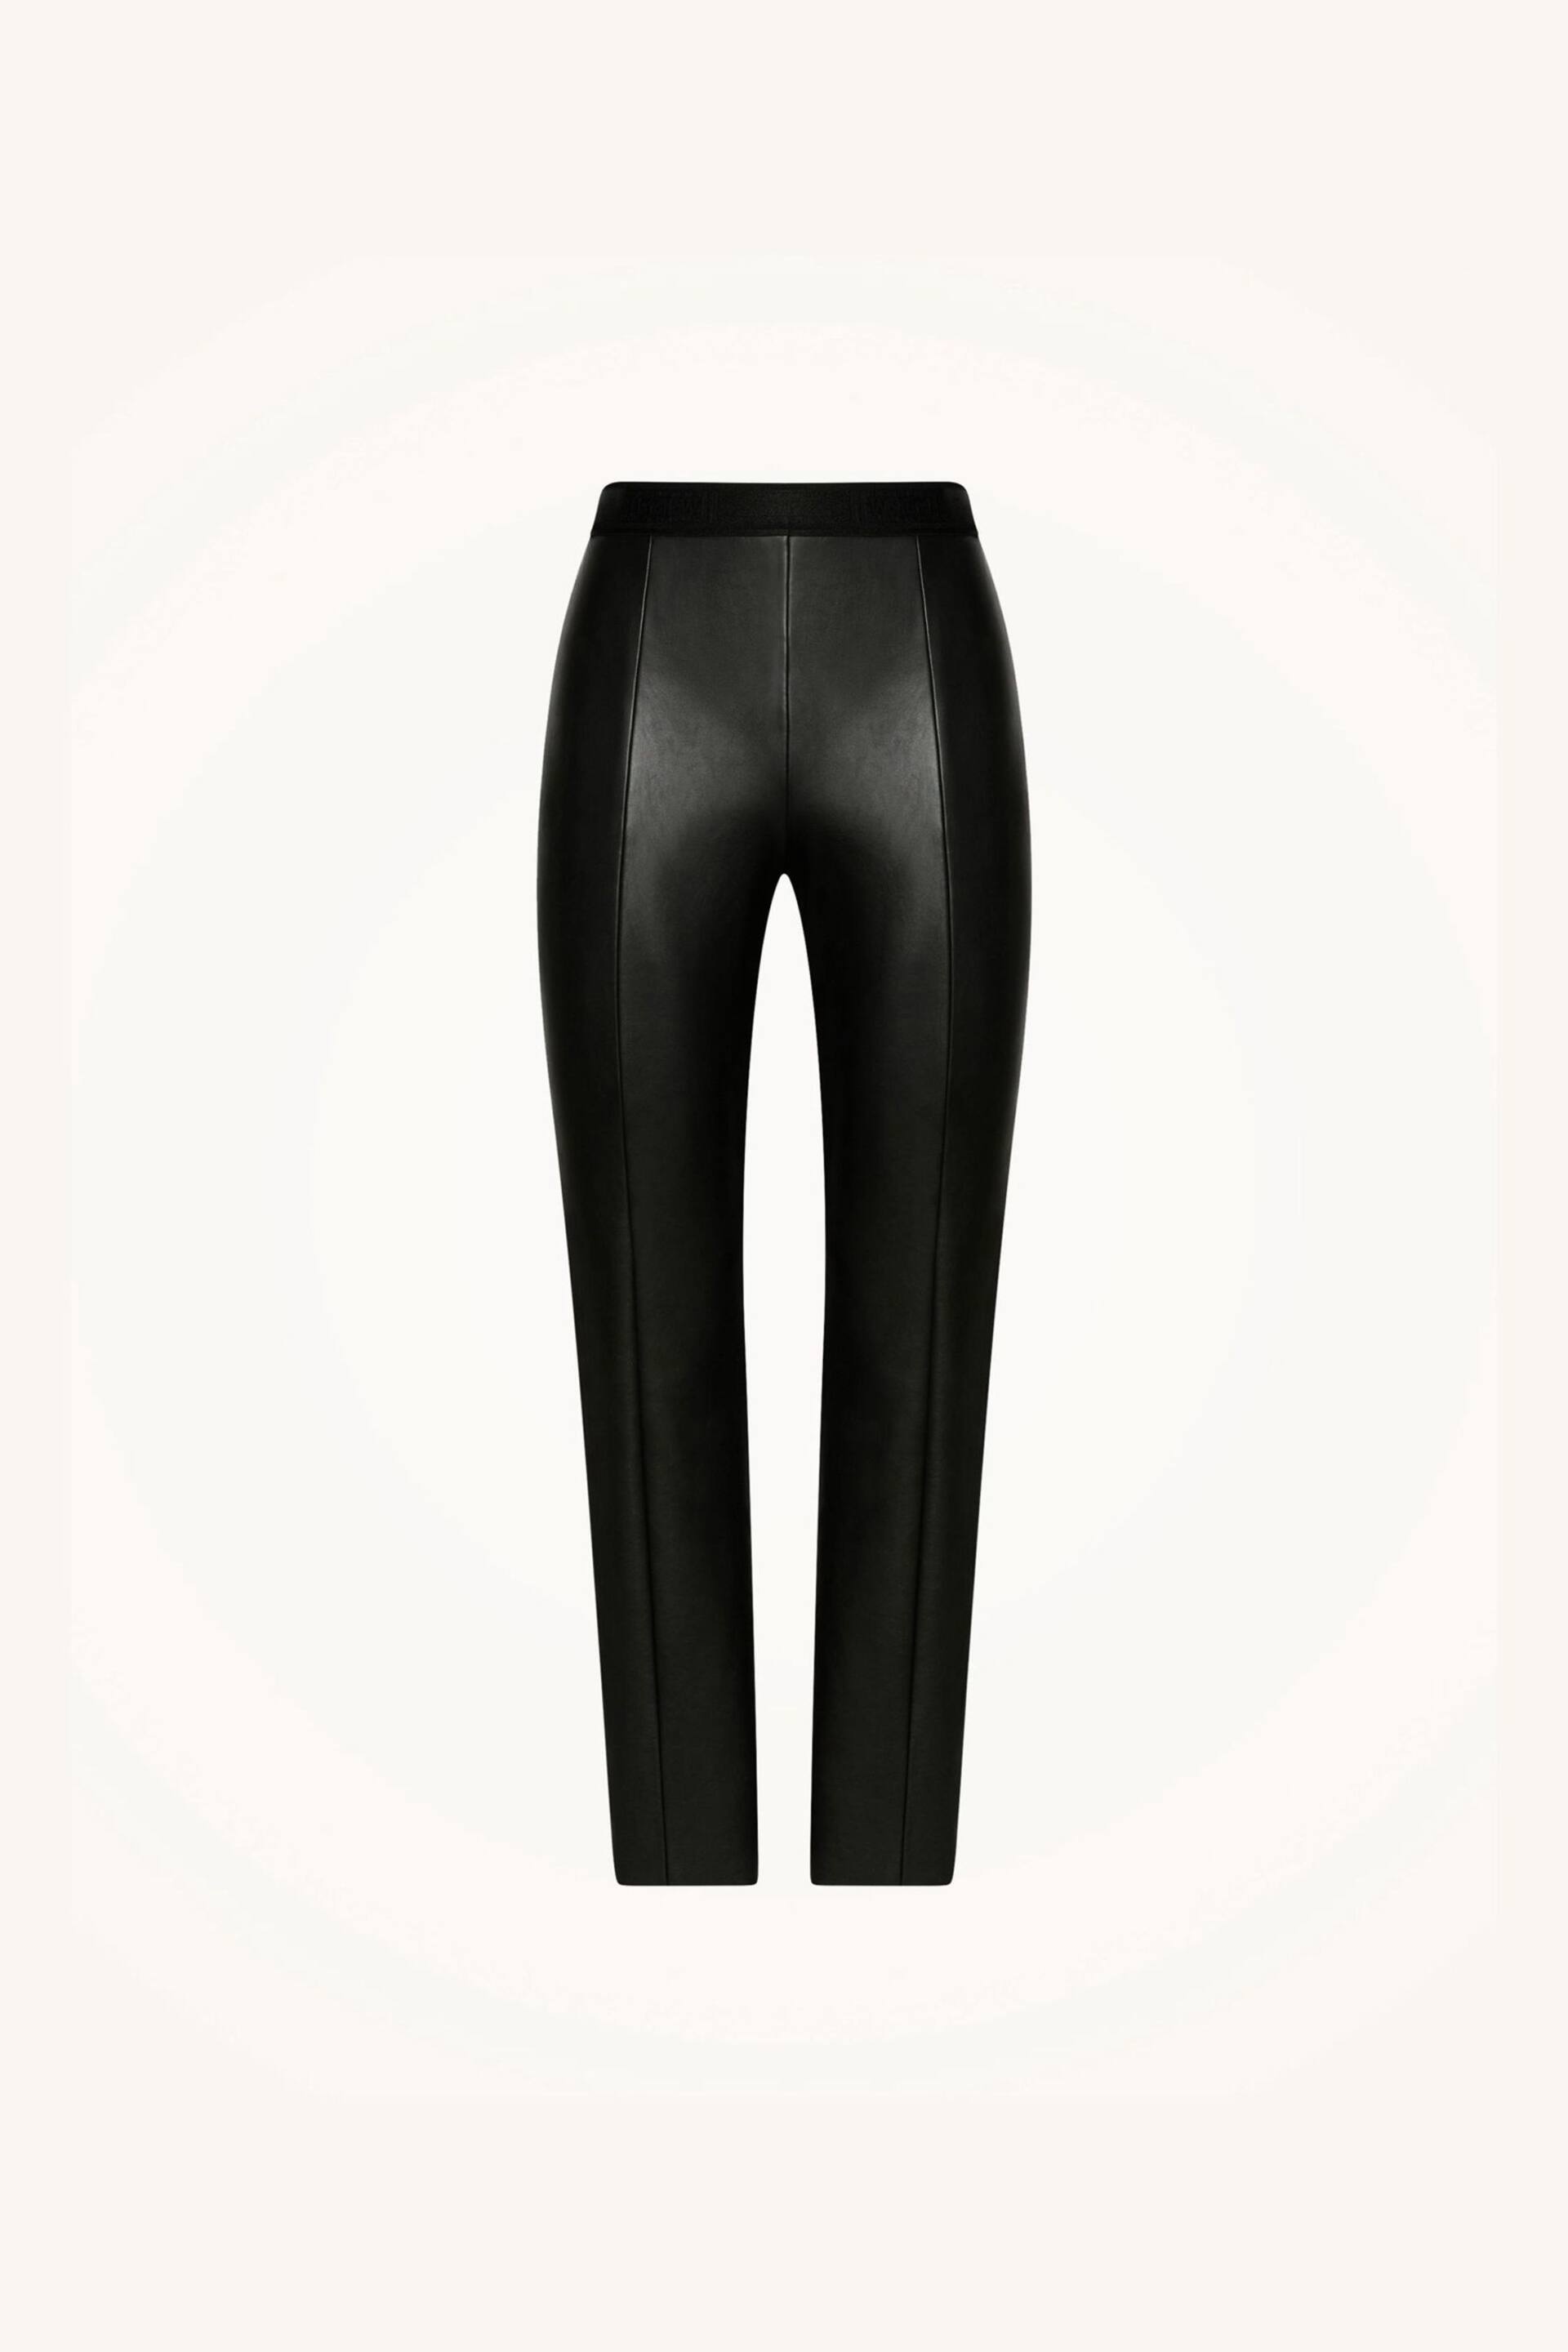 Wolford Black Jenna Flare Trousers - Image 4 of 5